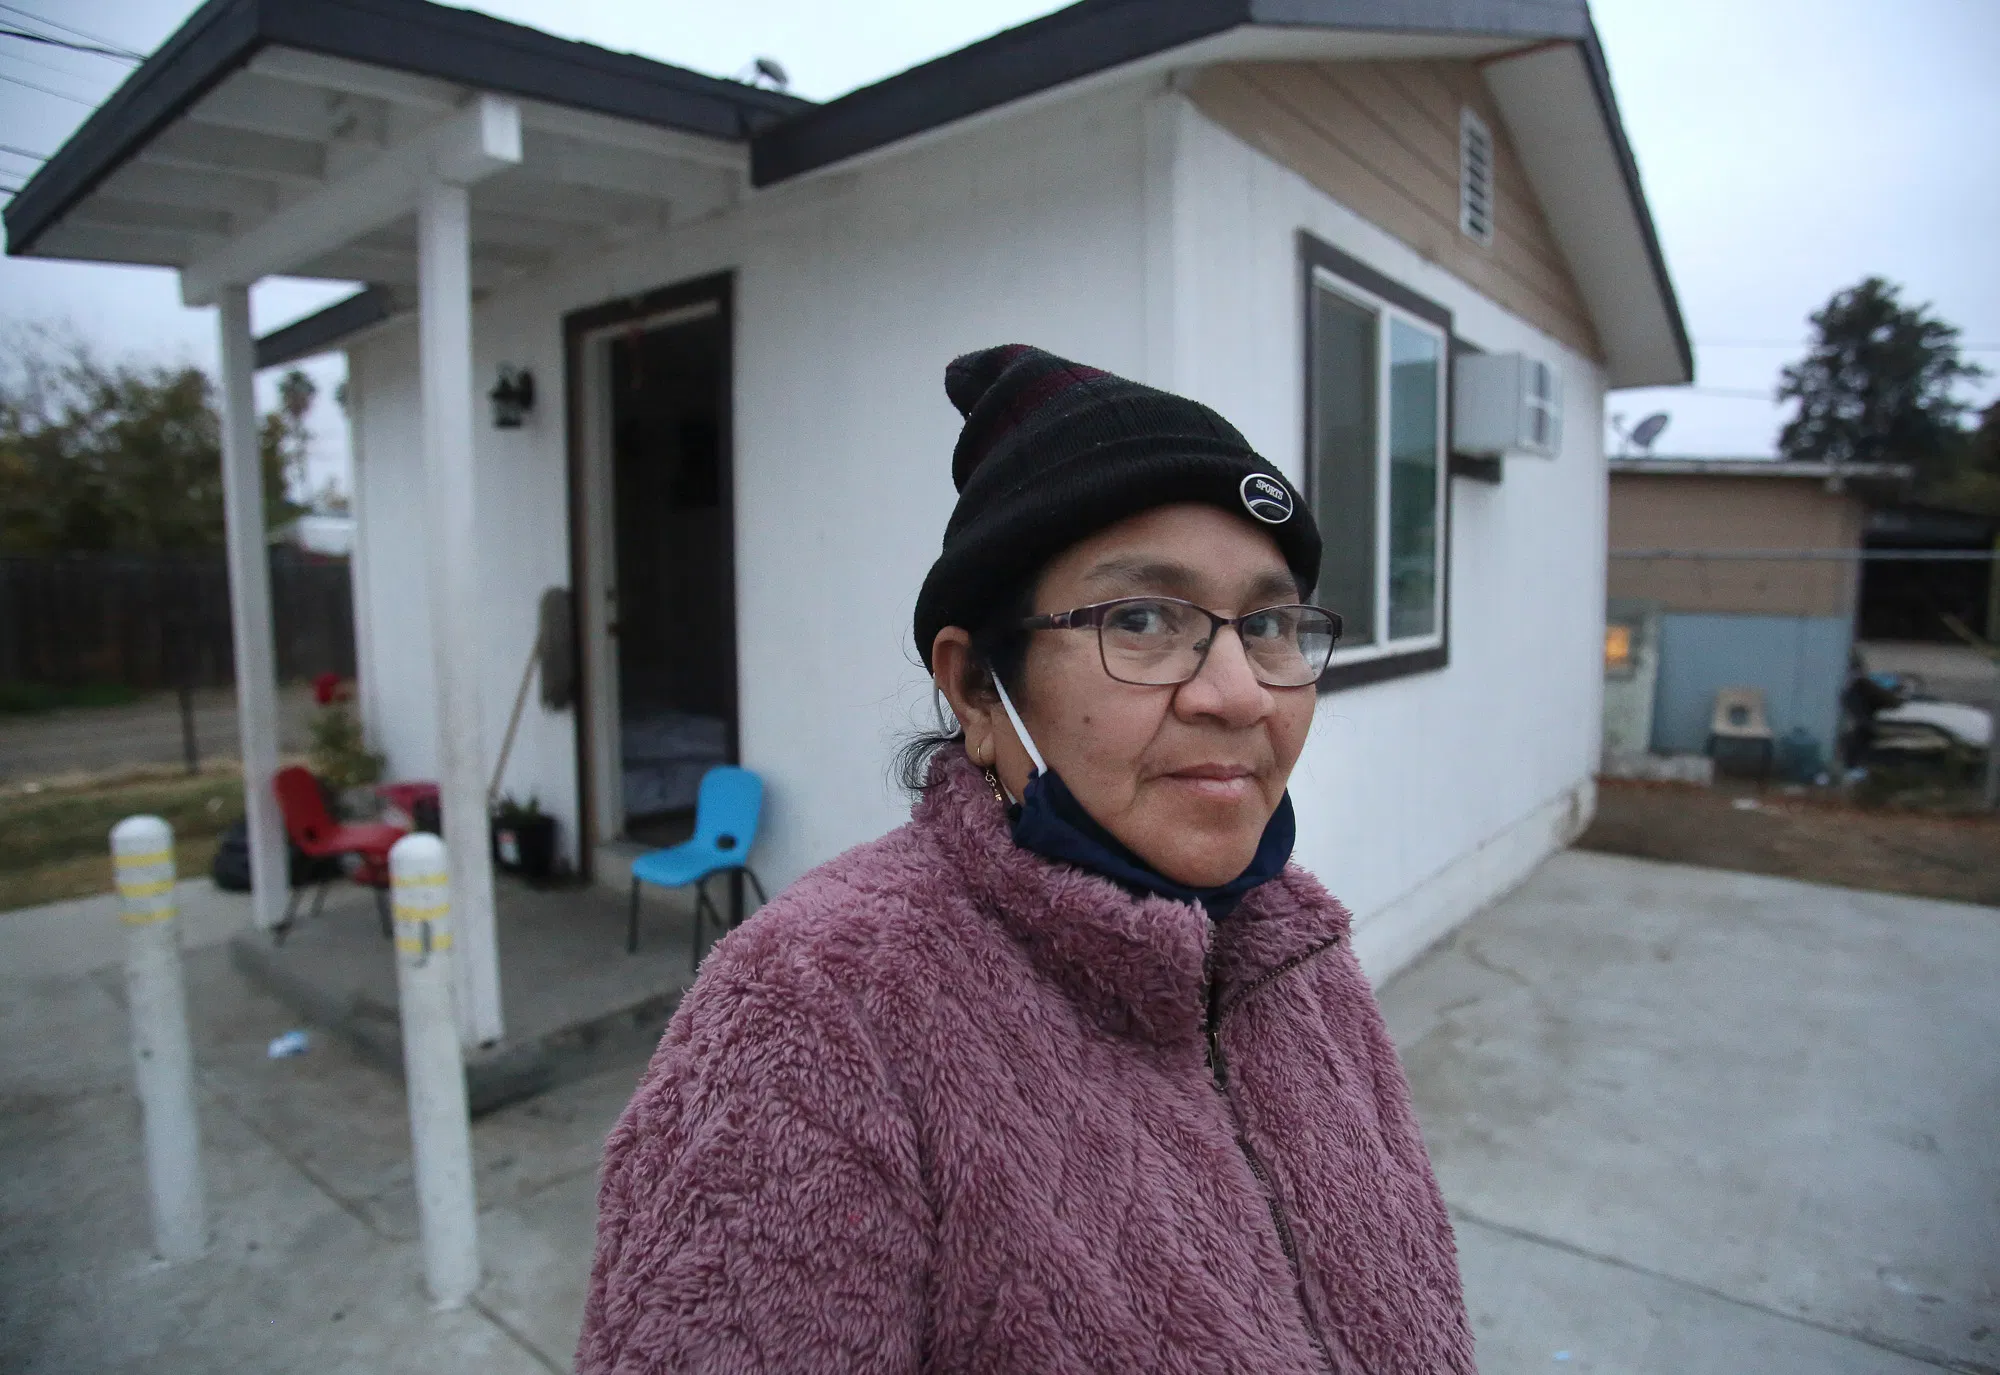 Why few farmworkers isolate in California’s free COVID-19 hotel rooms